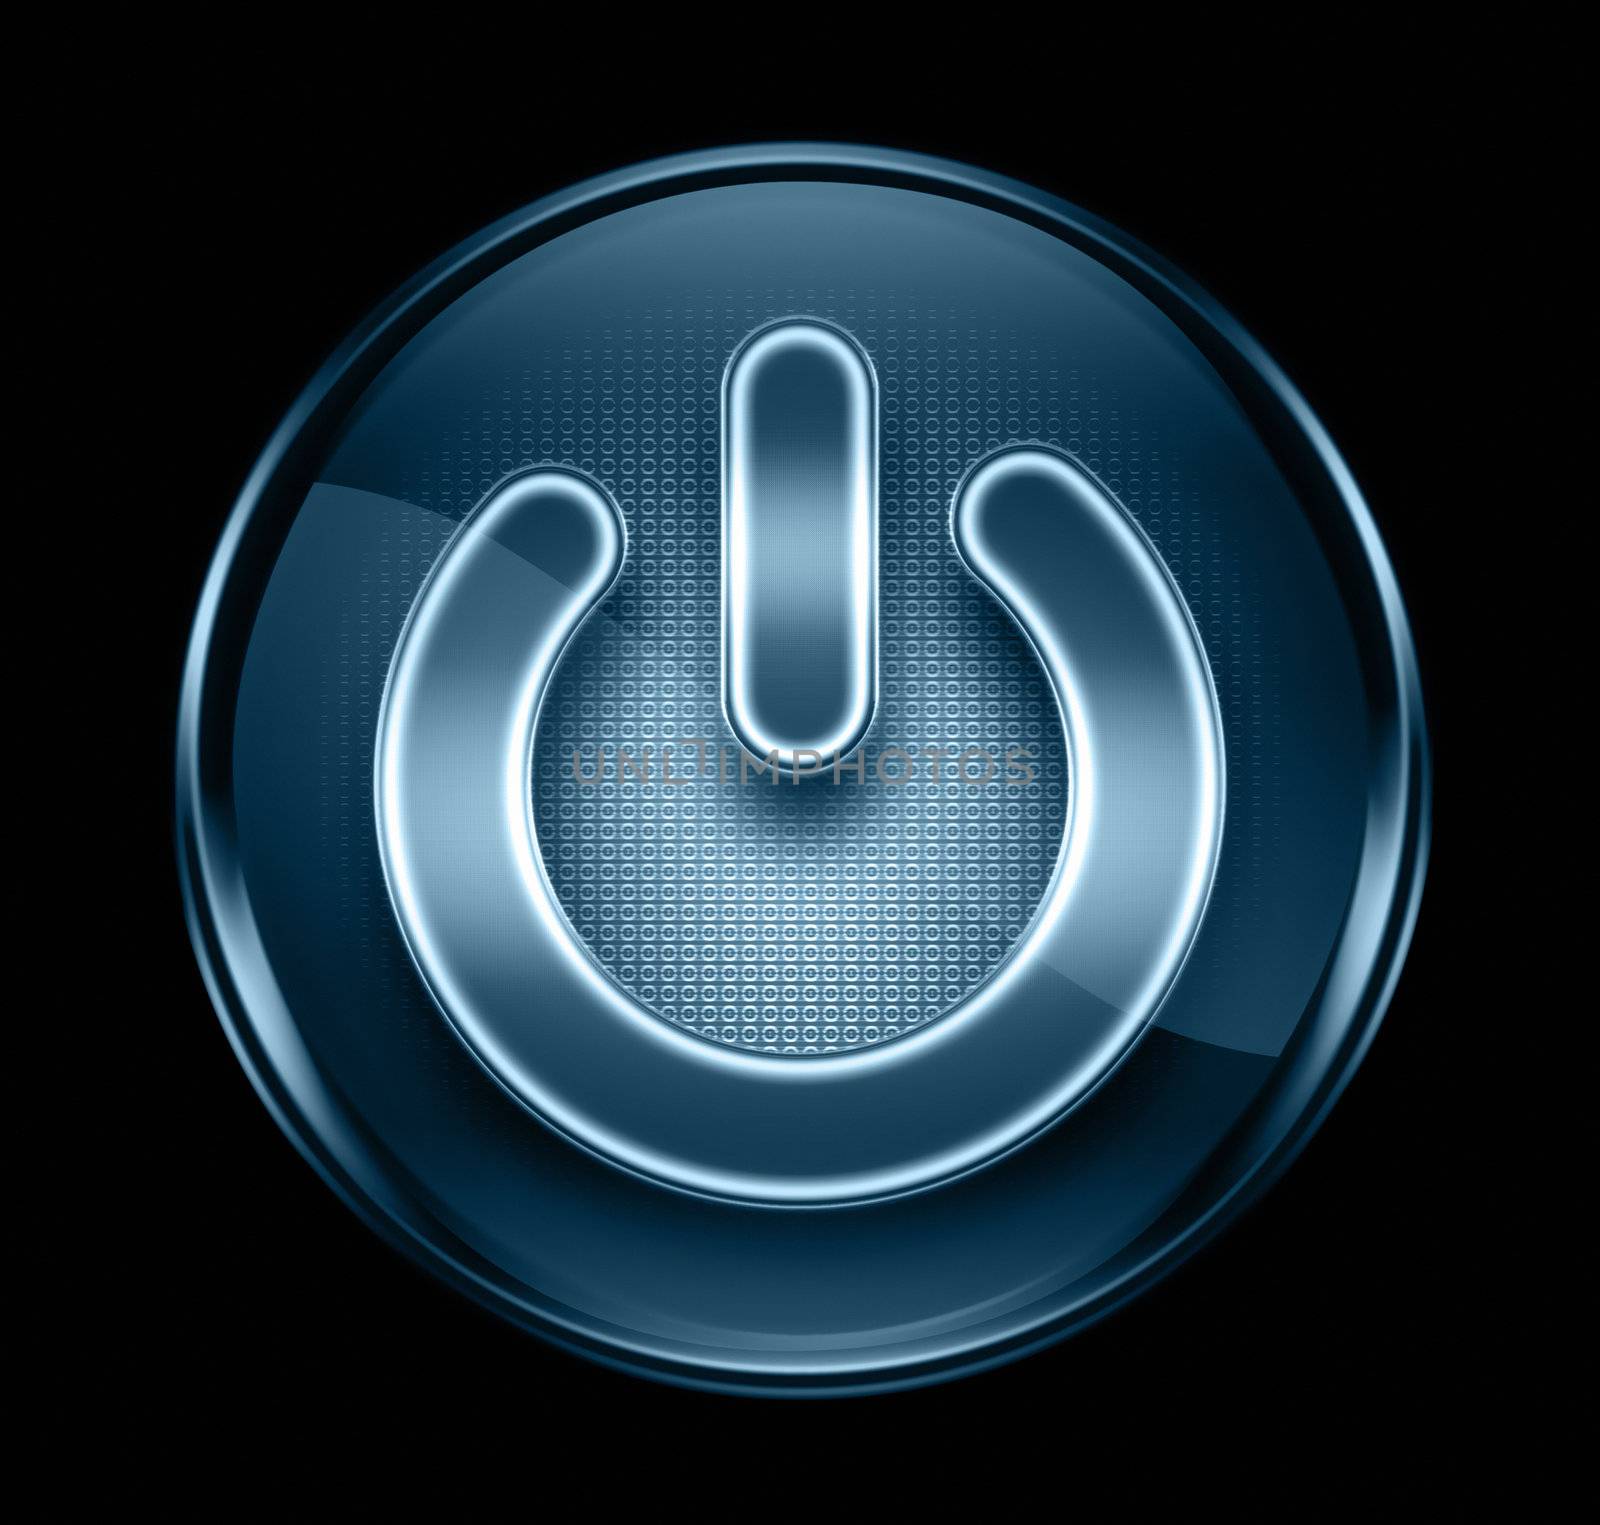 power button icon dark blue, isolated on black